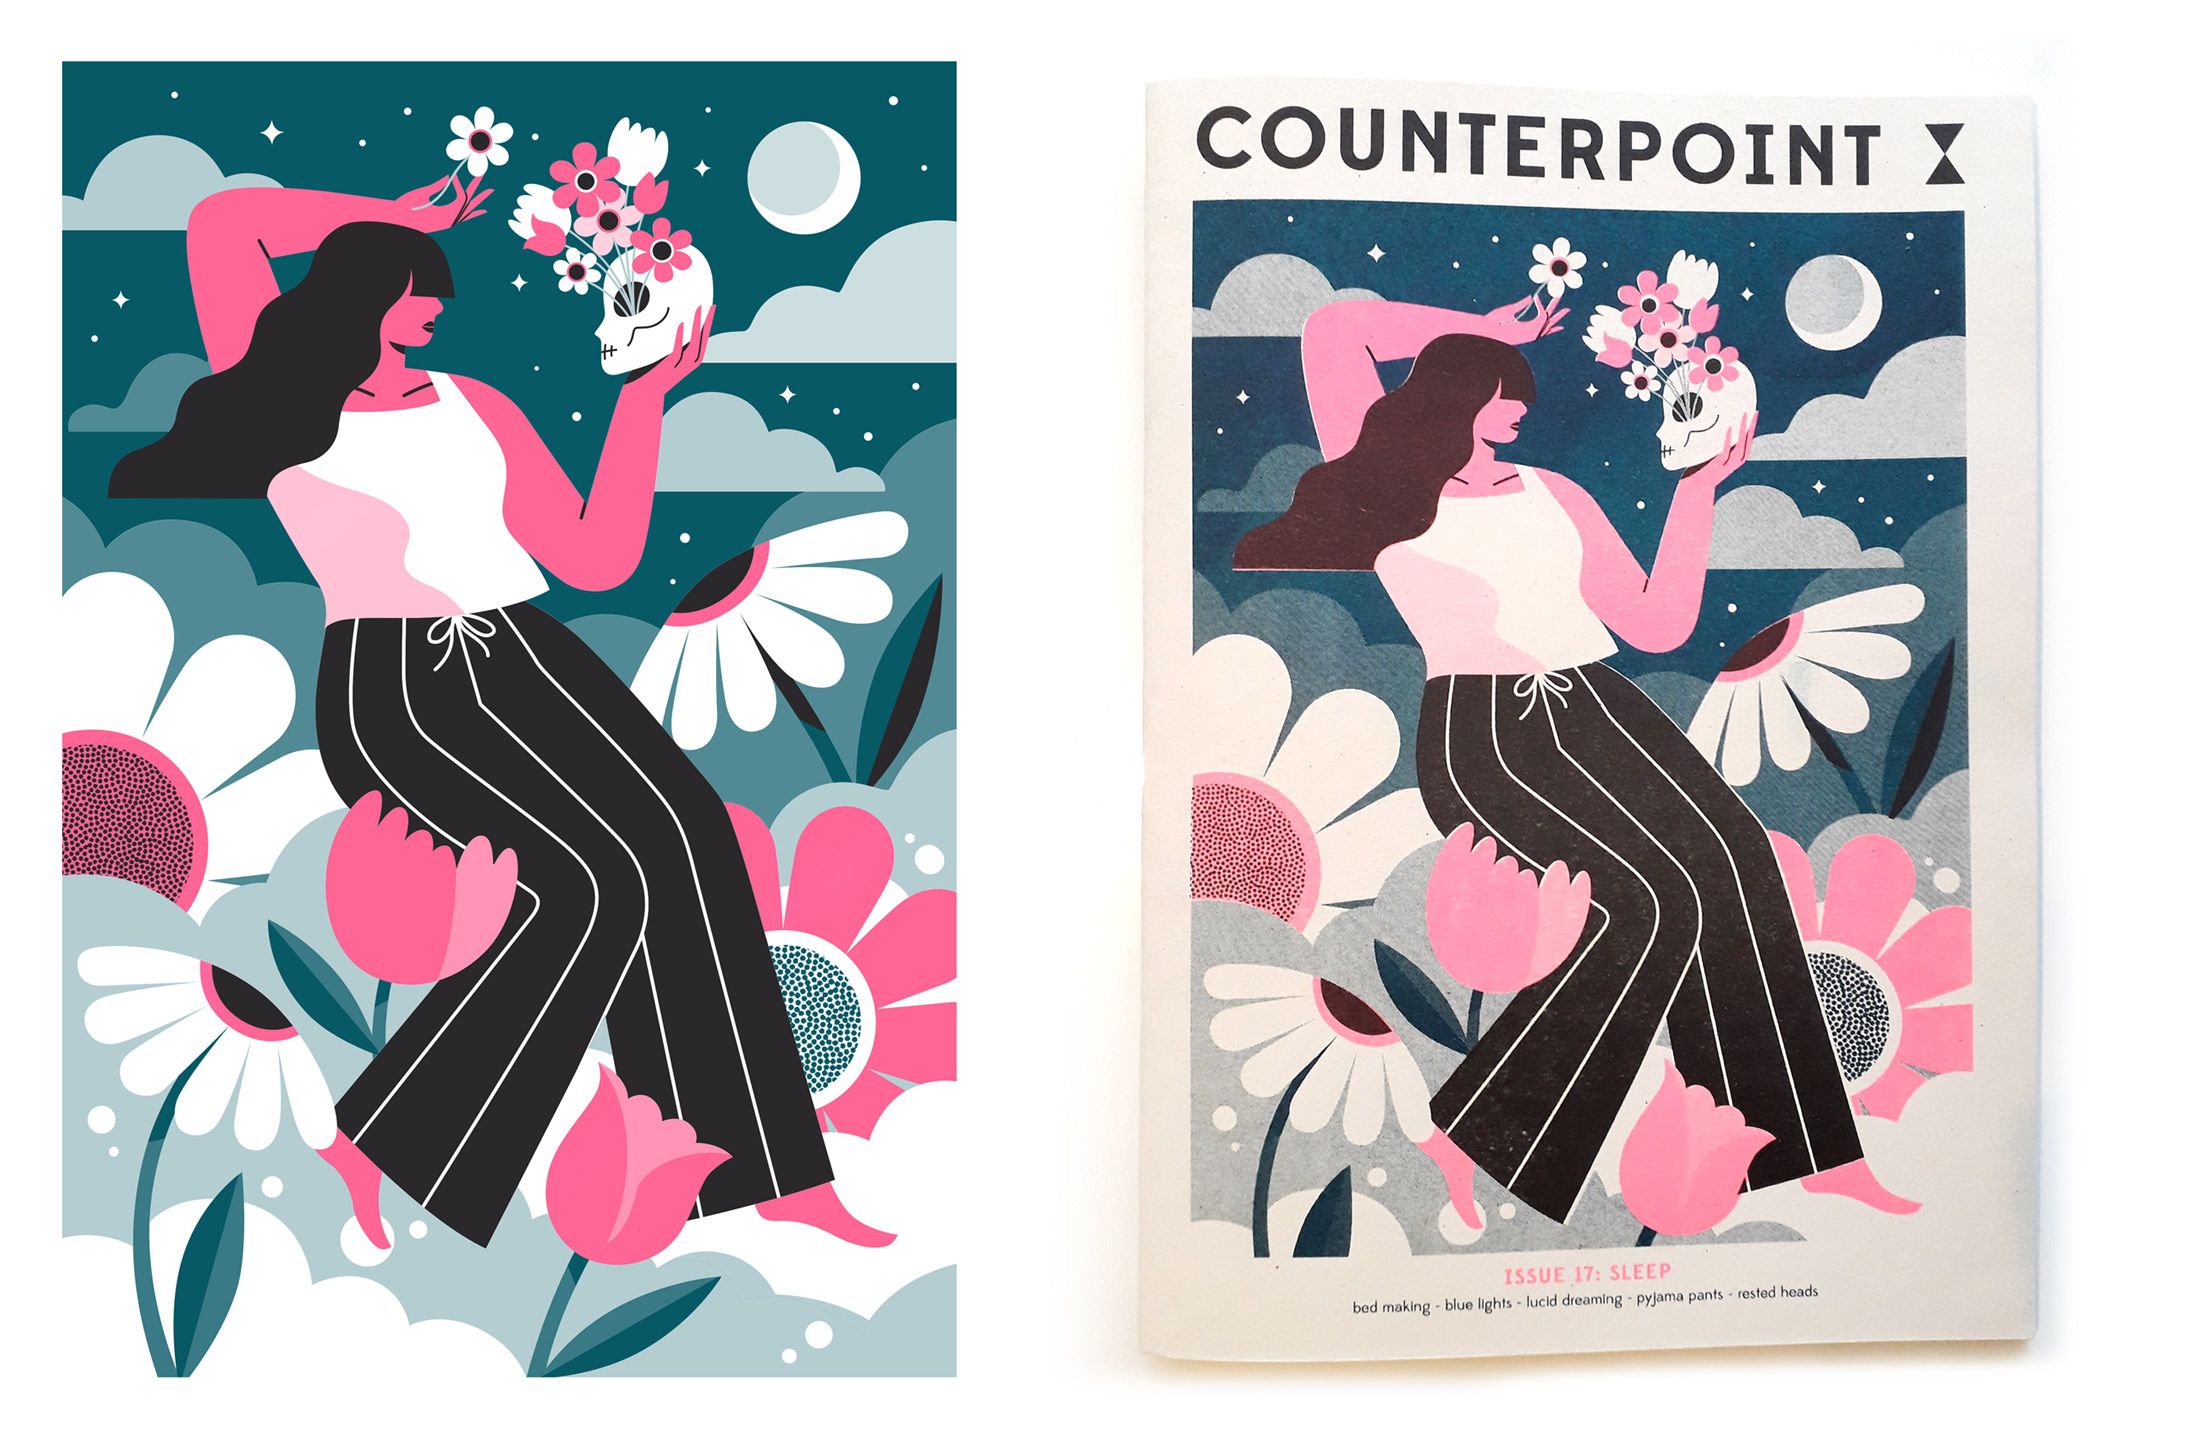 Cover illustration for Counterpoint magazine, Dreams issue